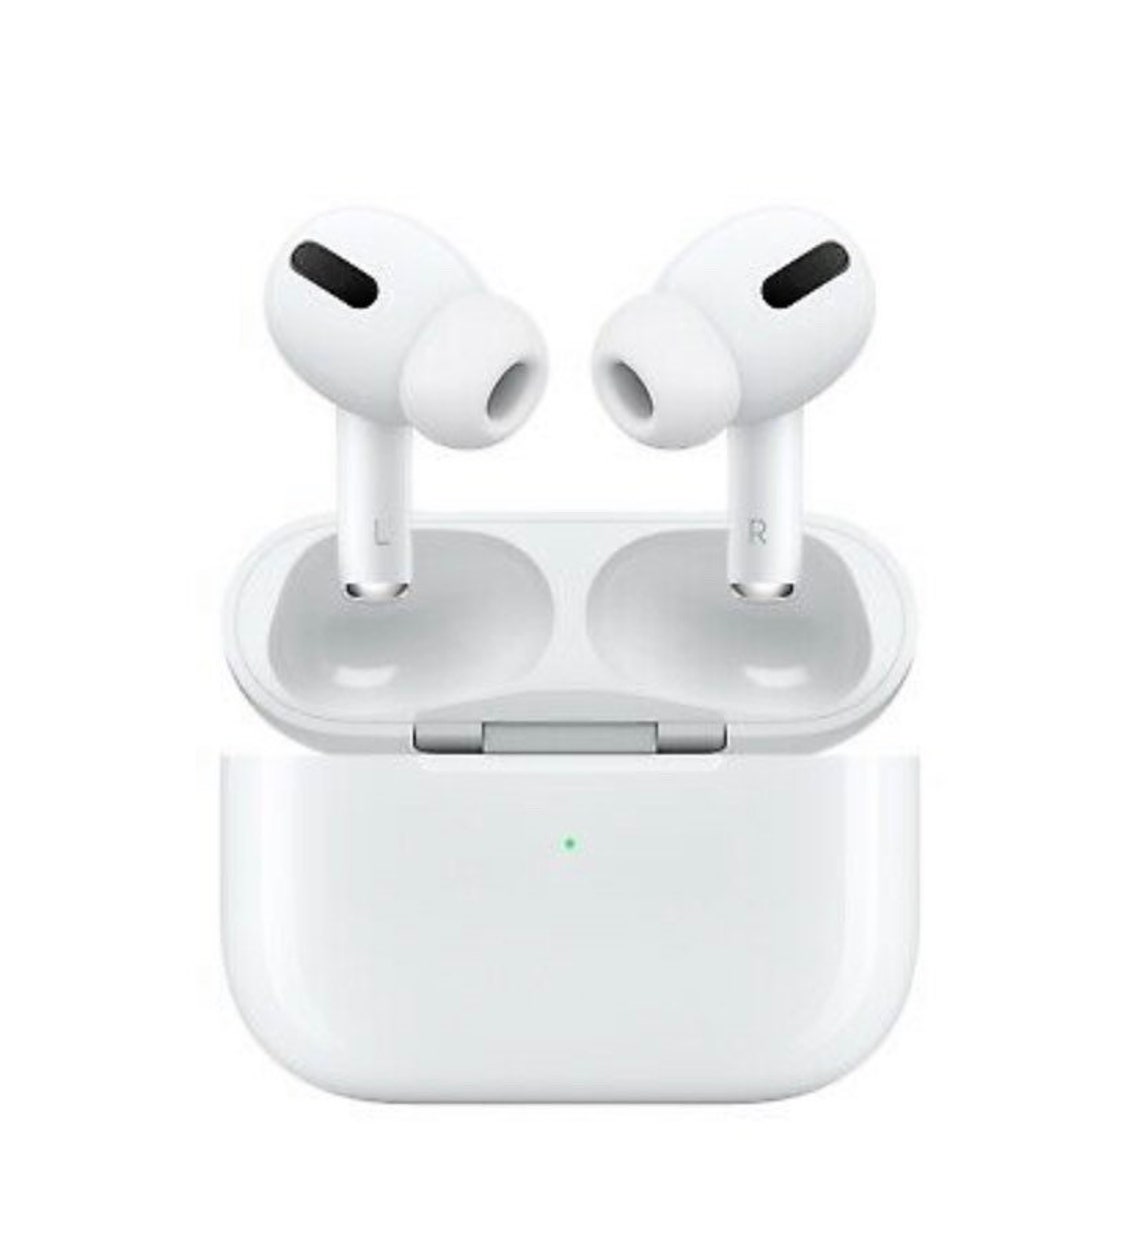 new-apple-airpods-pro-3rd-gen-white-etsy